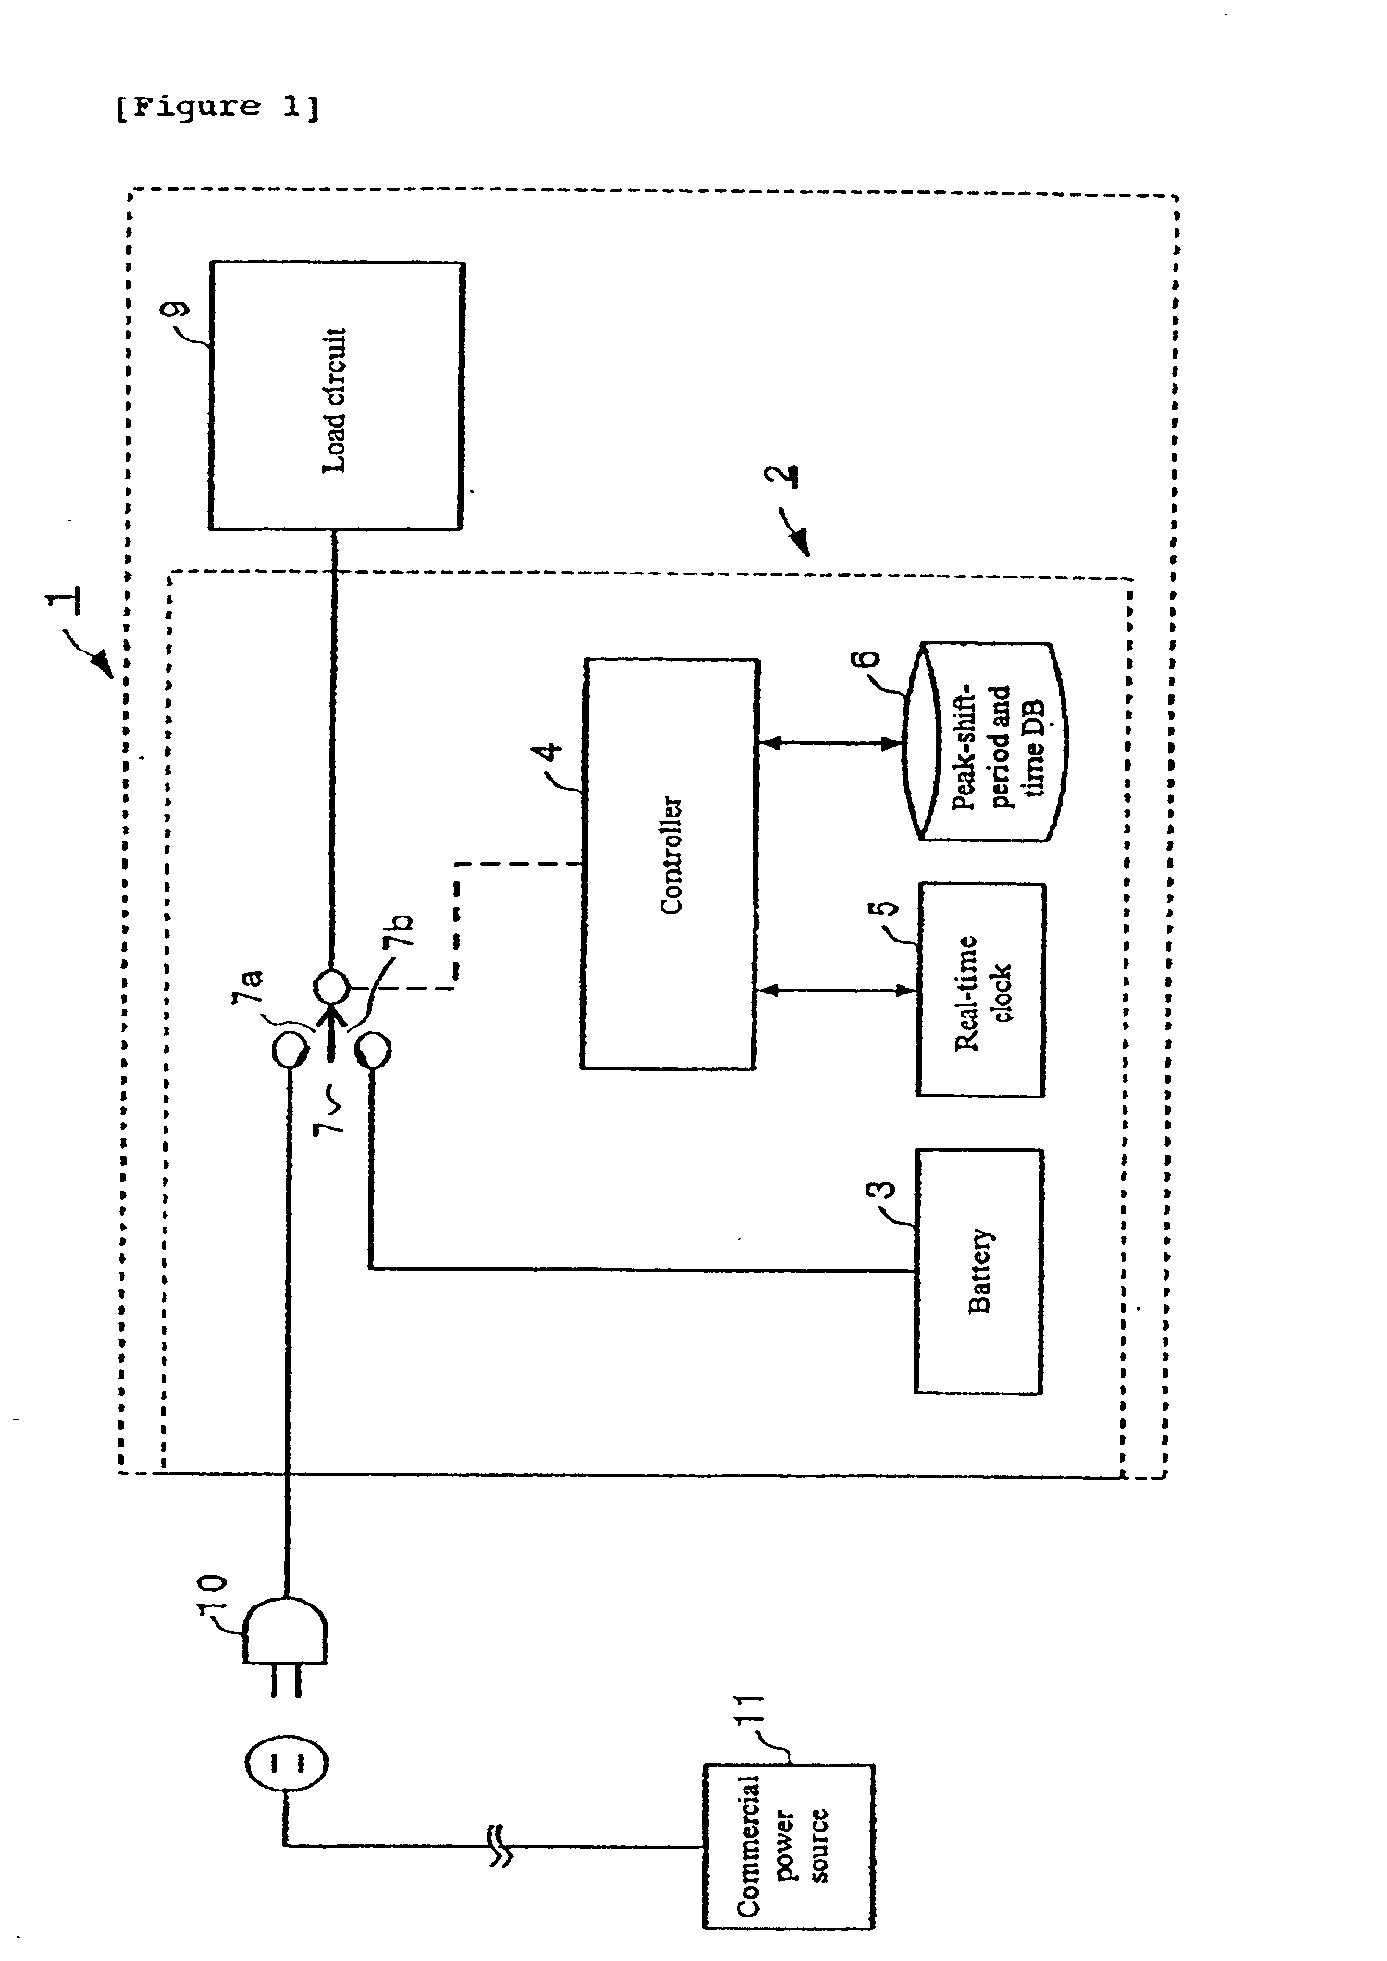 System, method and apparatus for controllable power supply